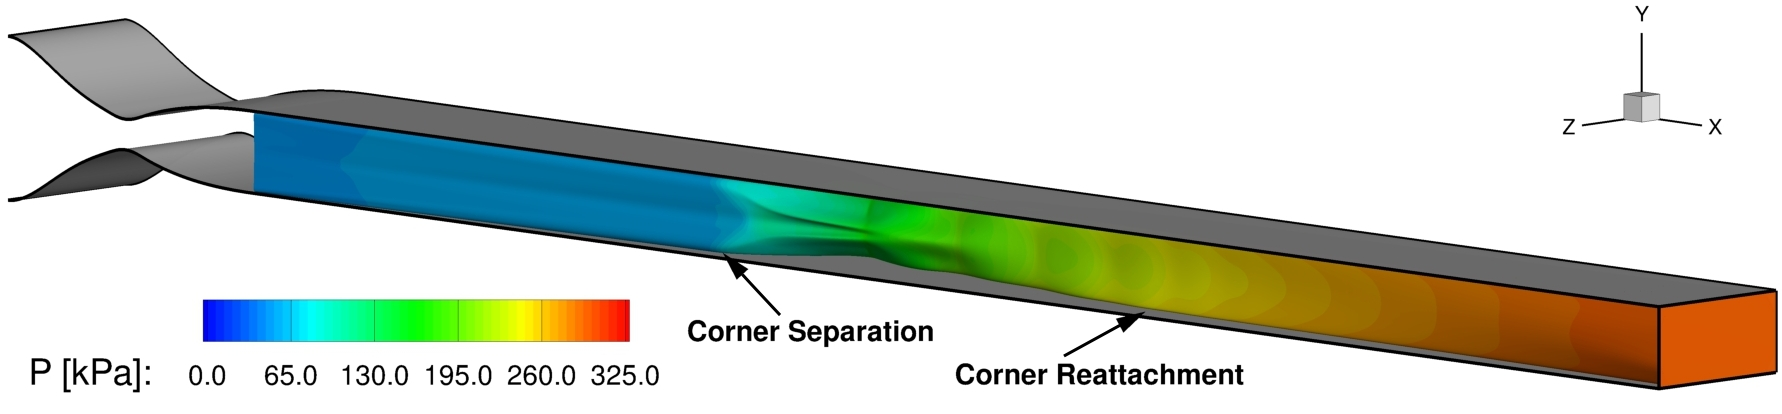 Total pressure isosurface colored by static pressure values